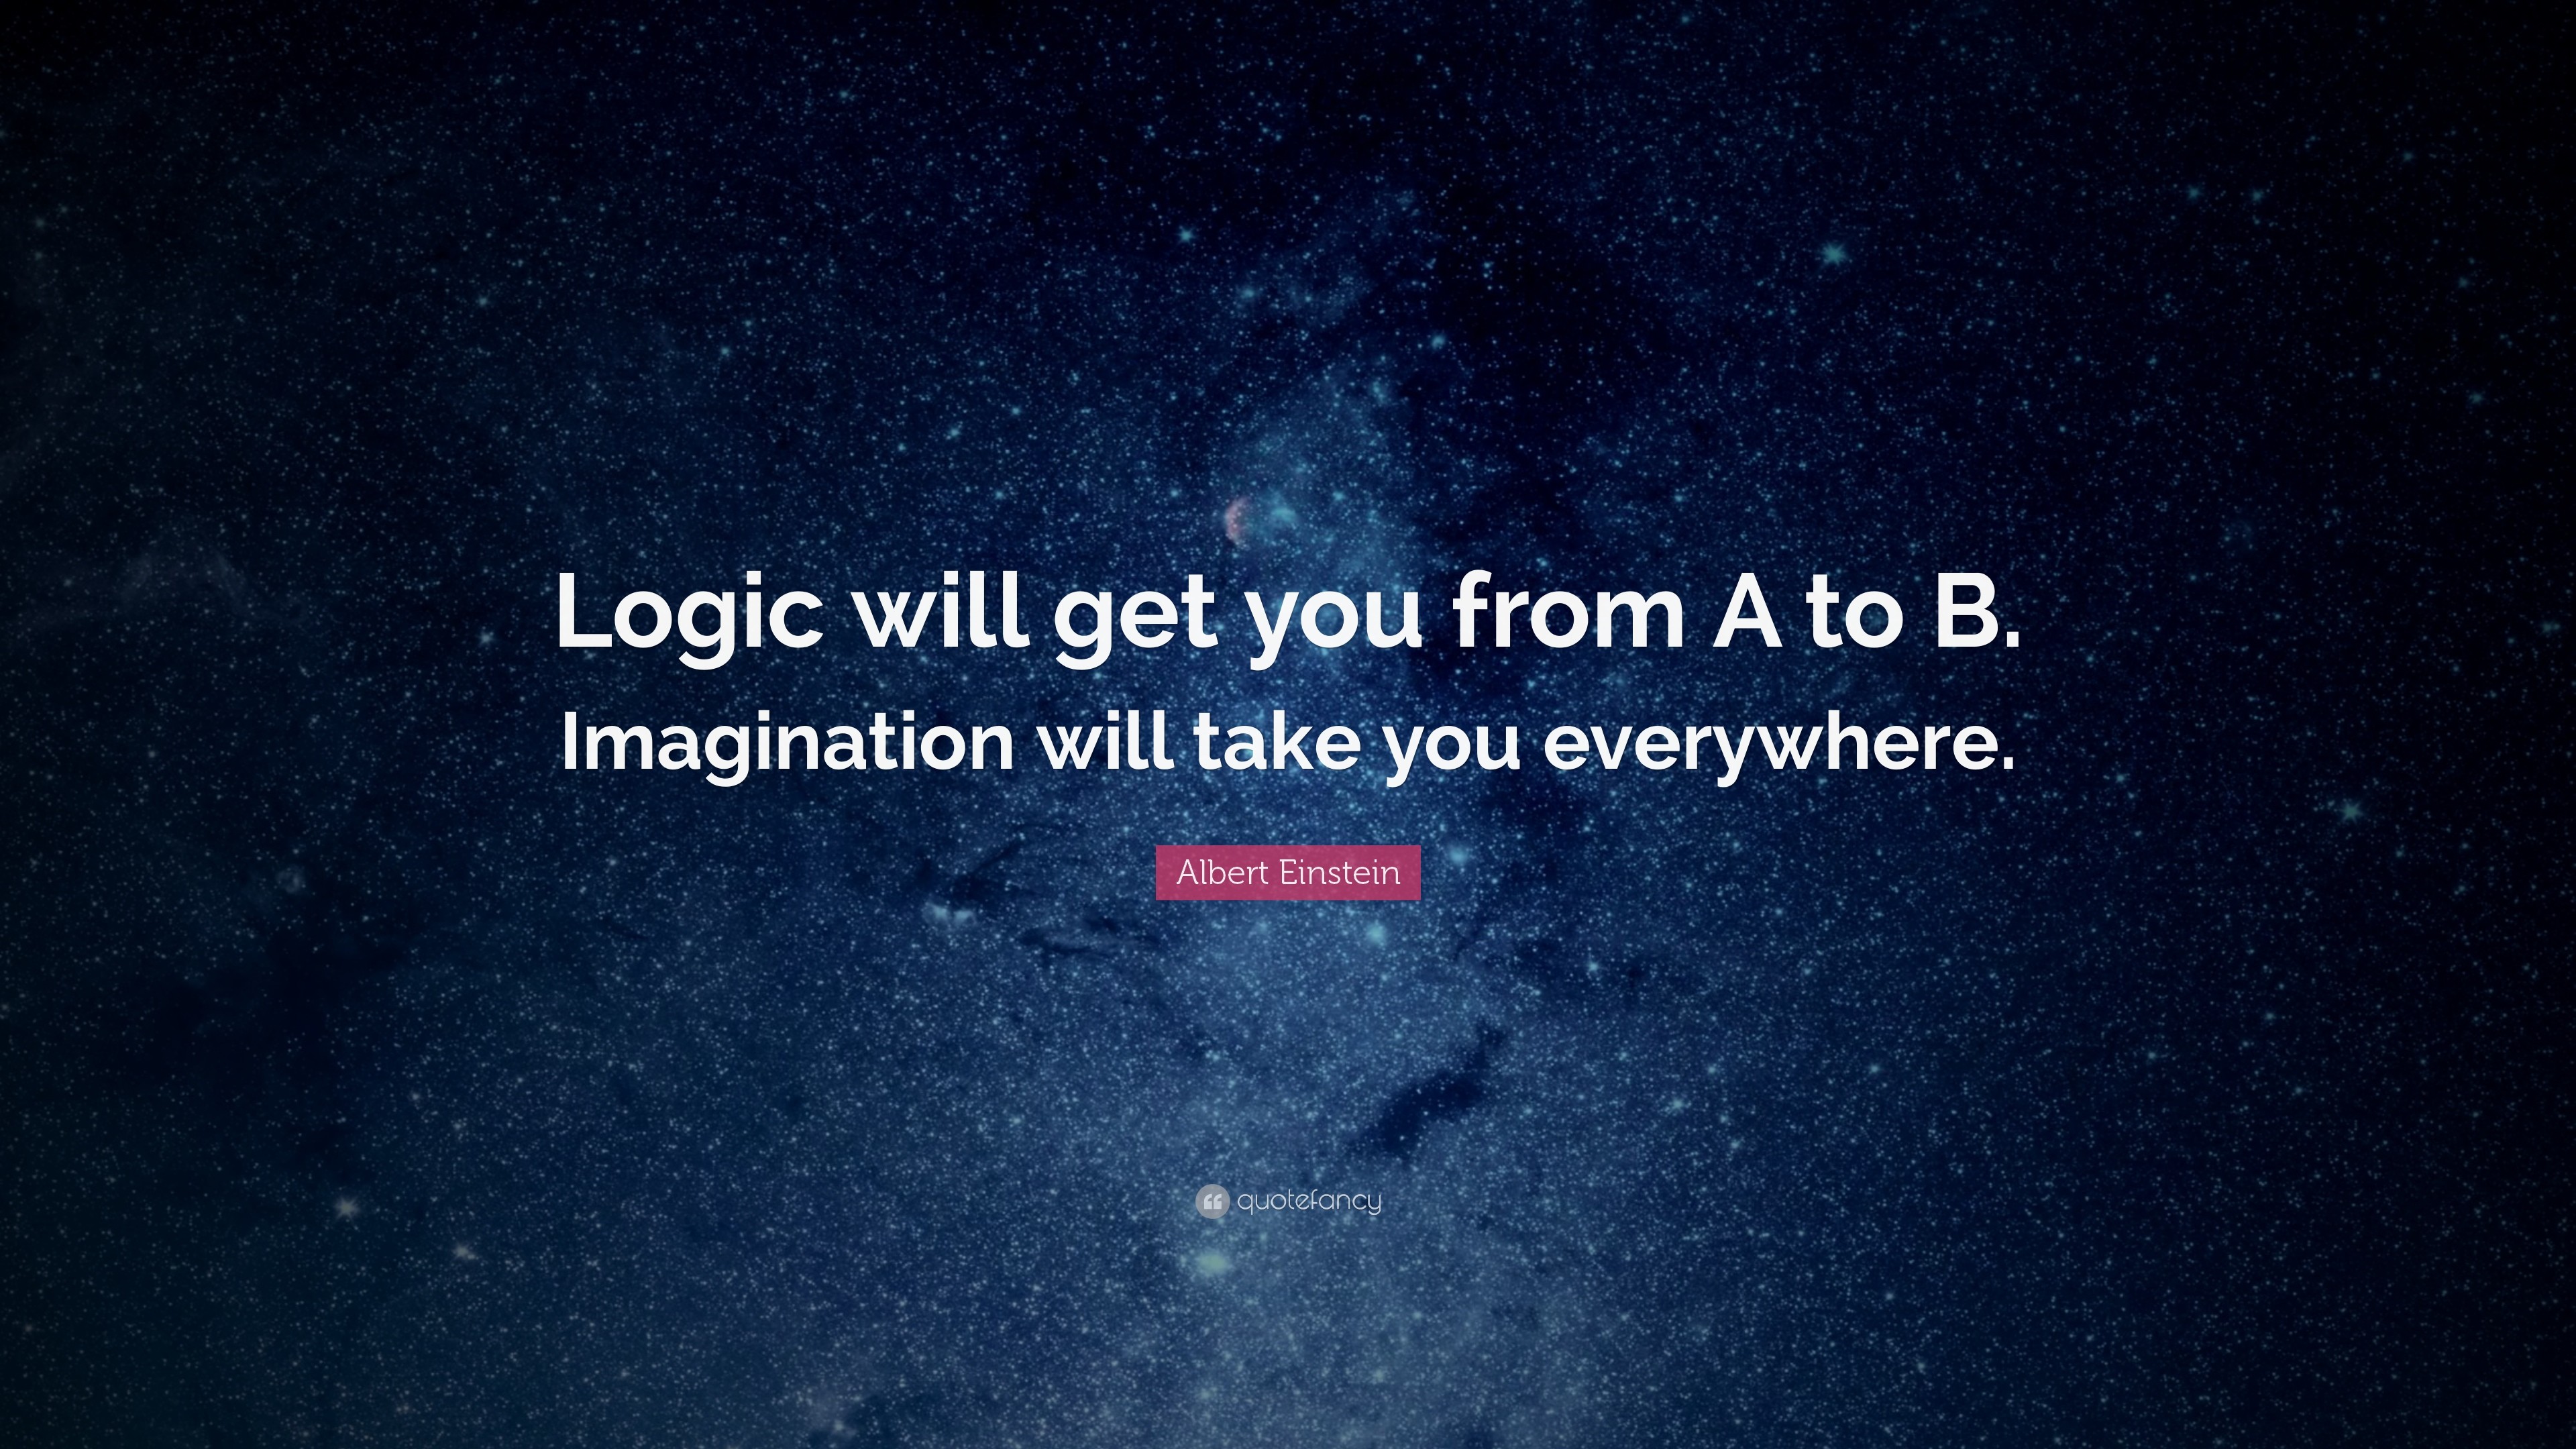 3840x2160 Albert Einstein Quote: “Logic will get you from A to B. Imagination will